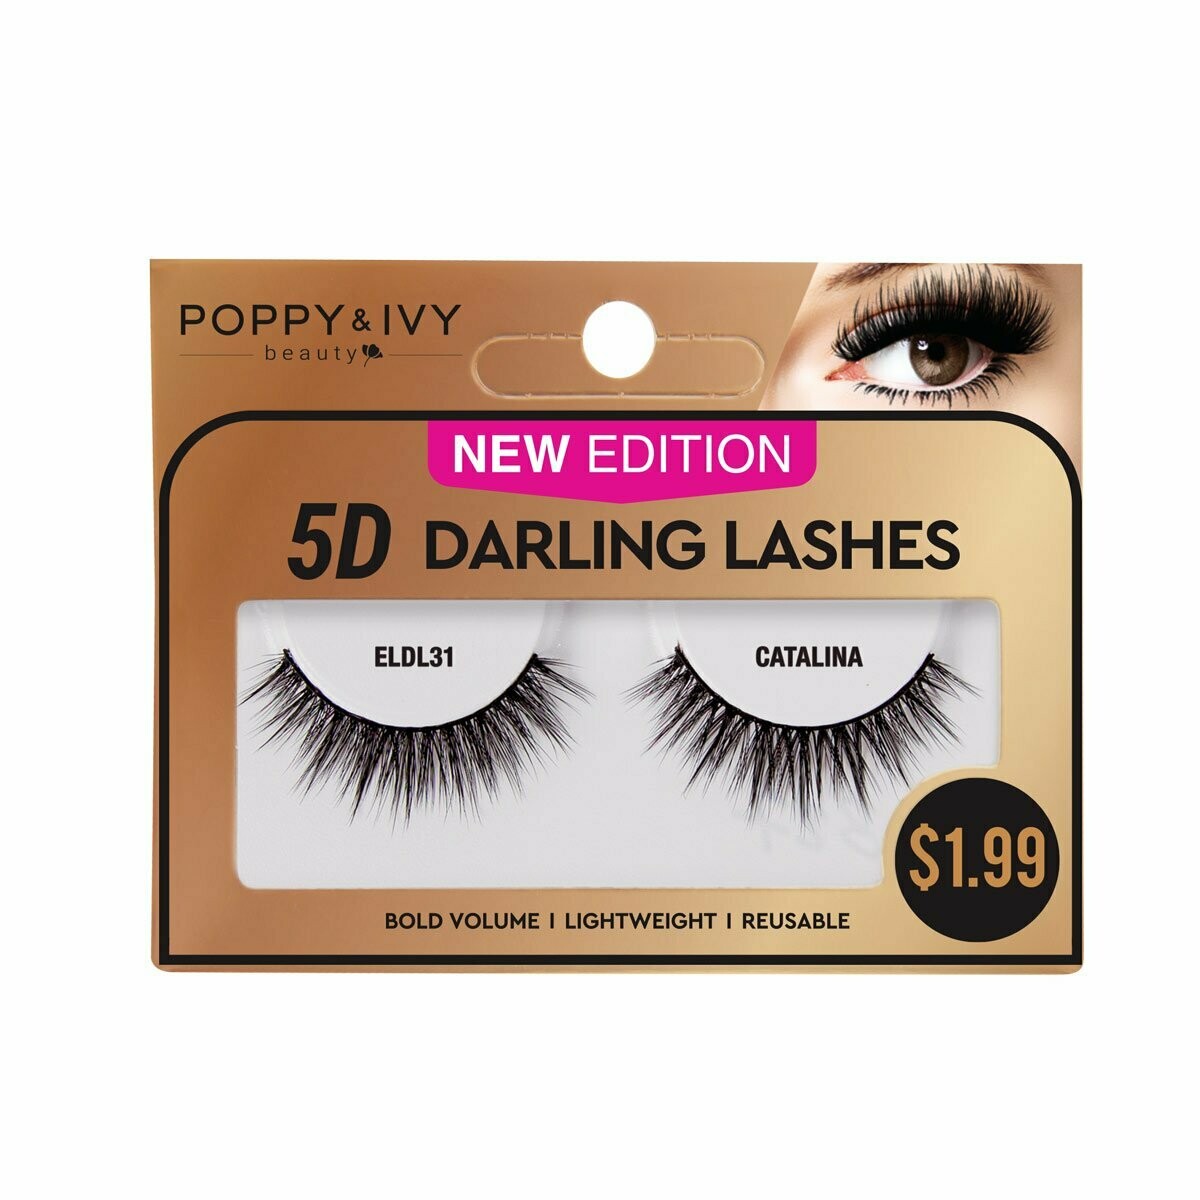 ABSOLUTE 5D DARLING LASHES ELDL31 - CATALINA